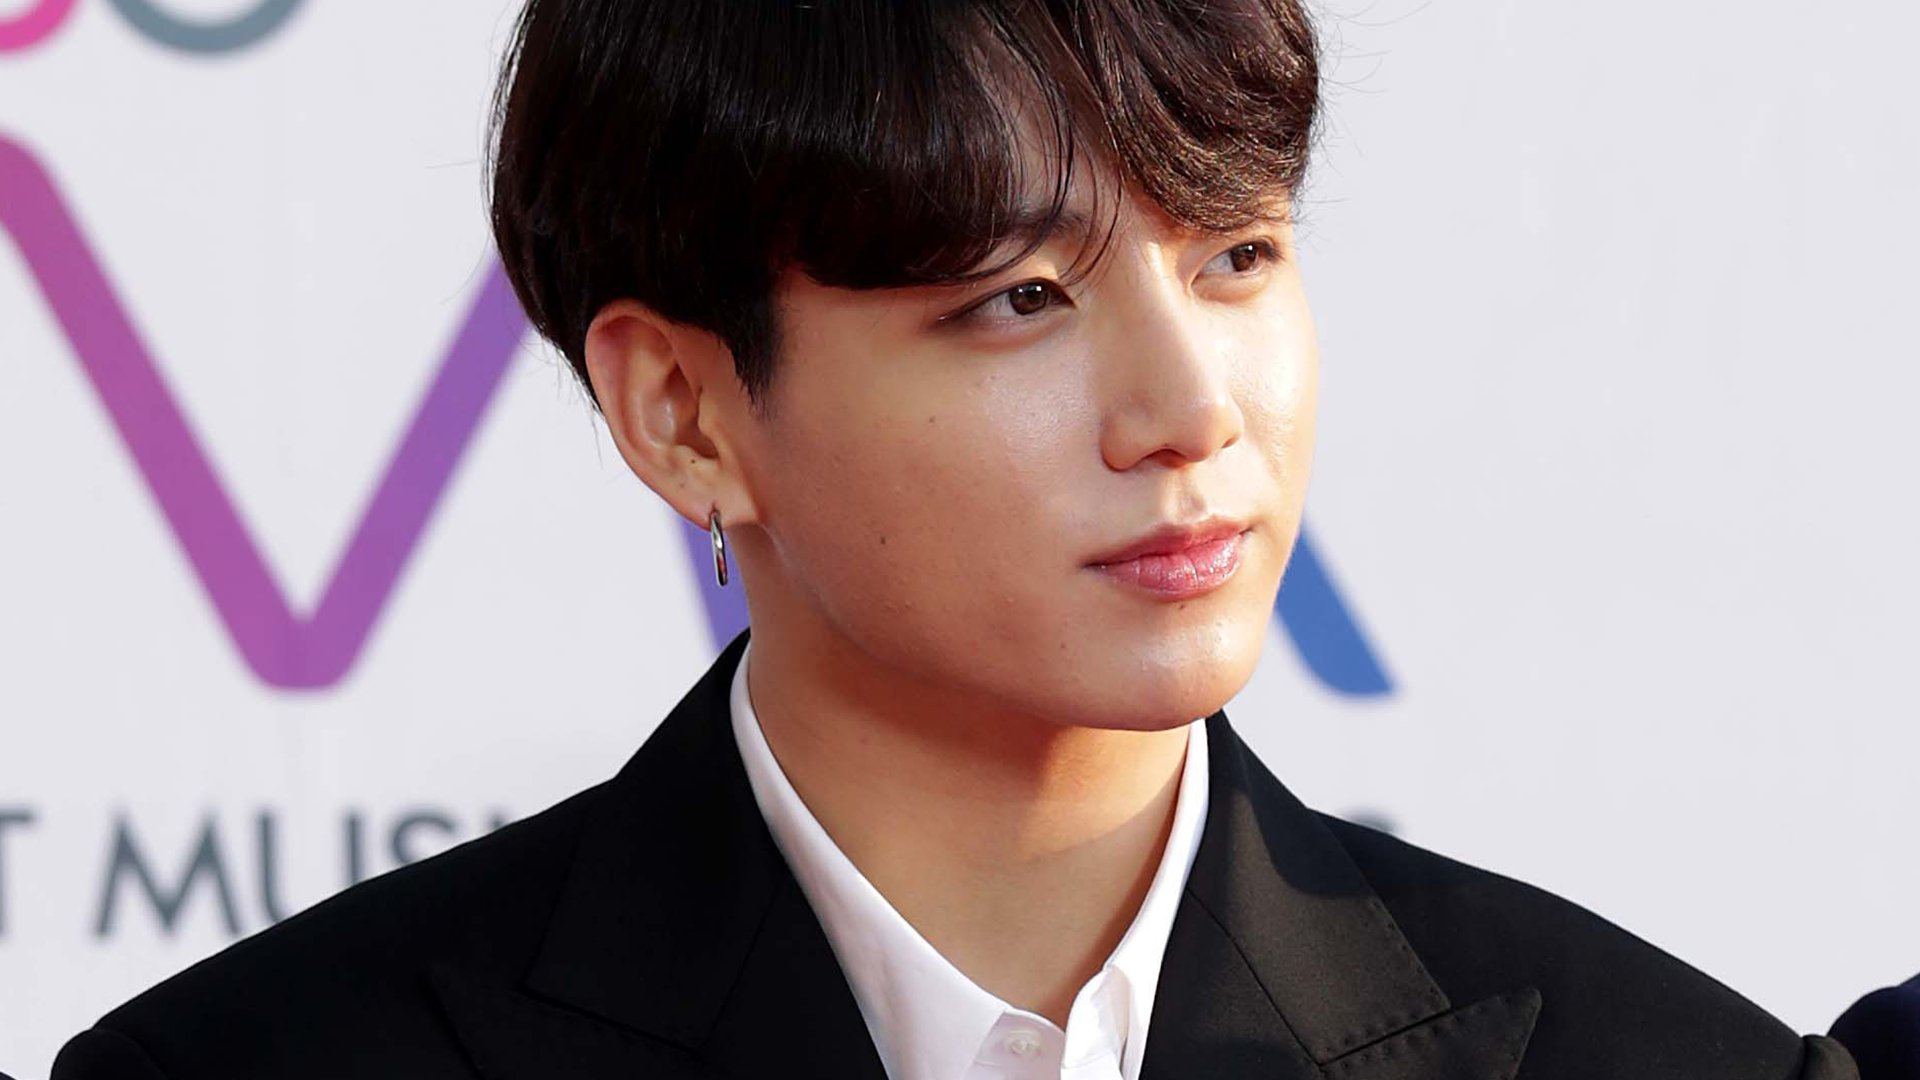 JungKook of boy band BTS attends the photocall for U Plus 5G 'The Fact Music Awards' on April 24, 2019